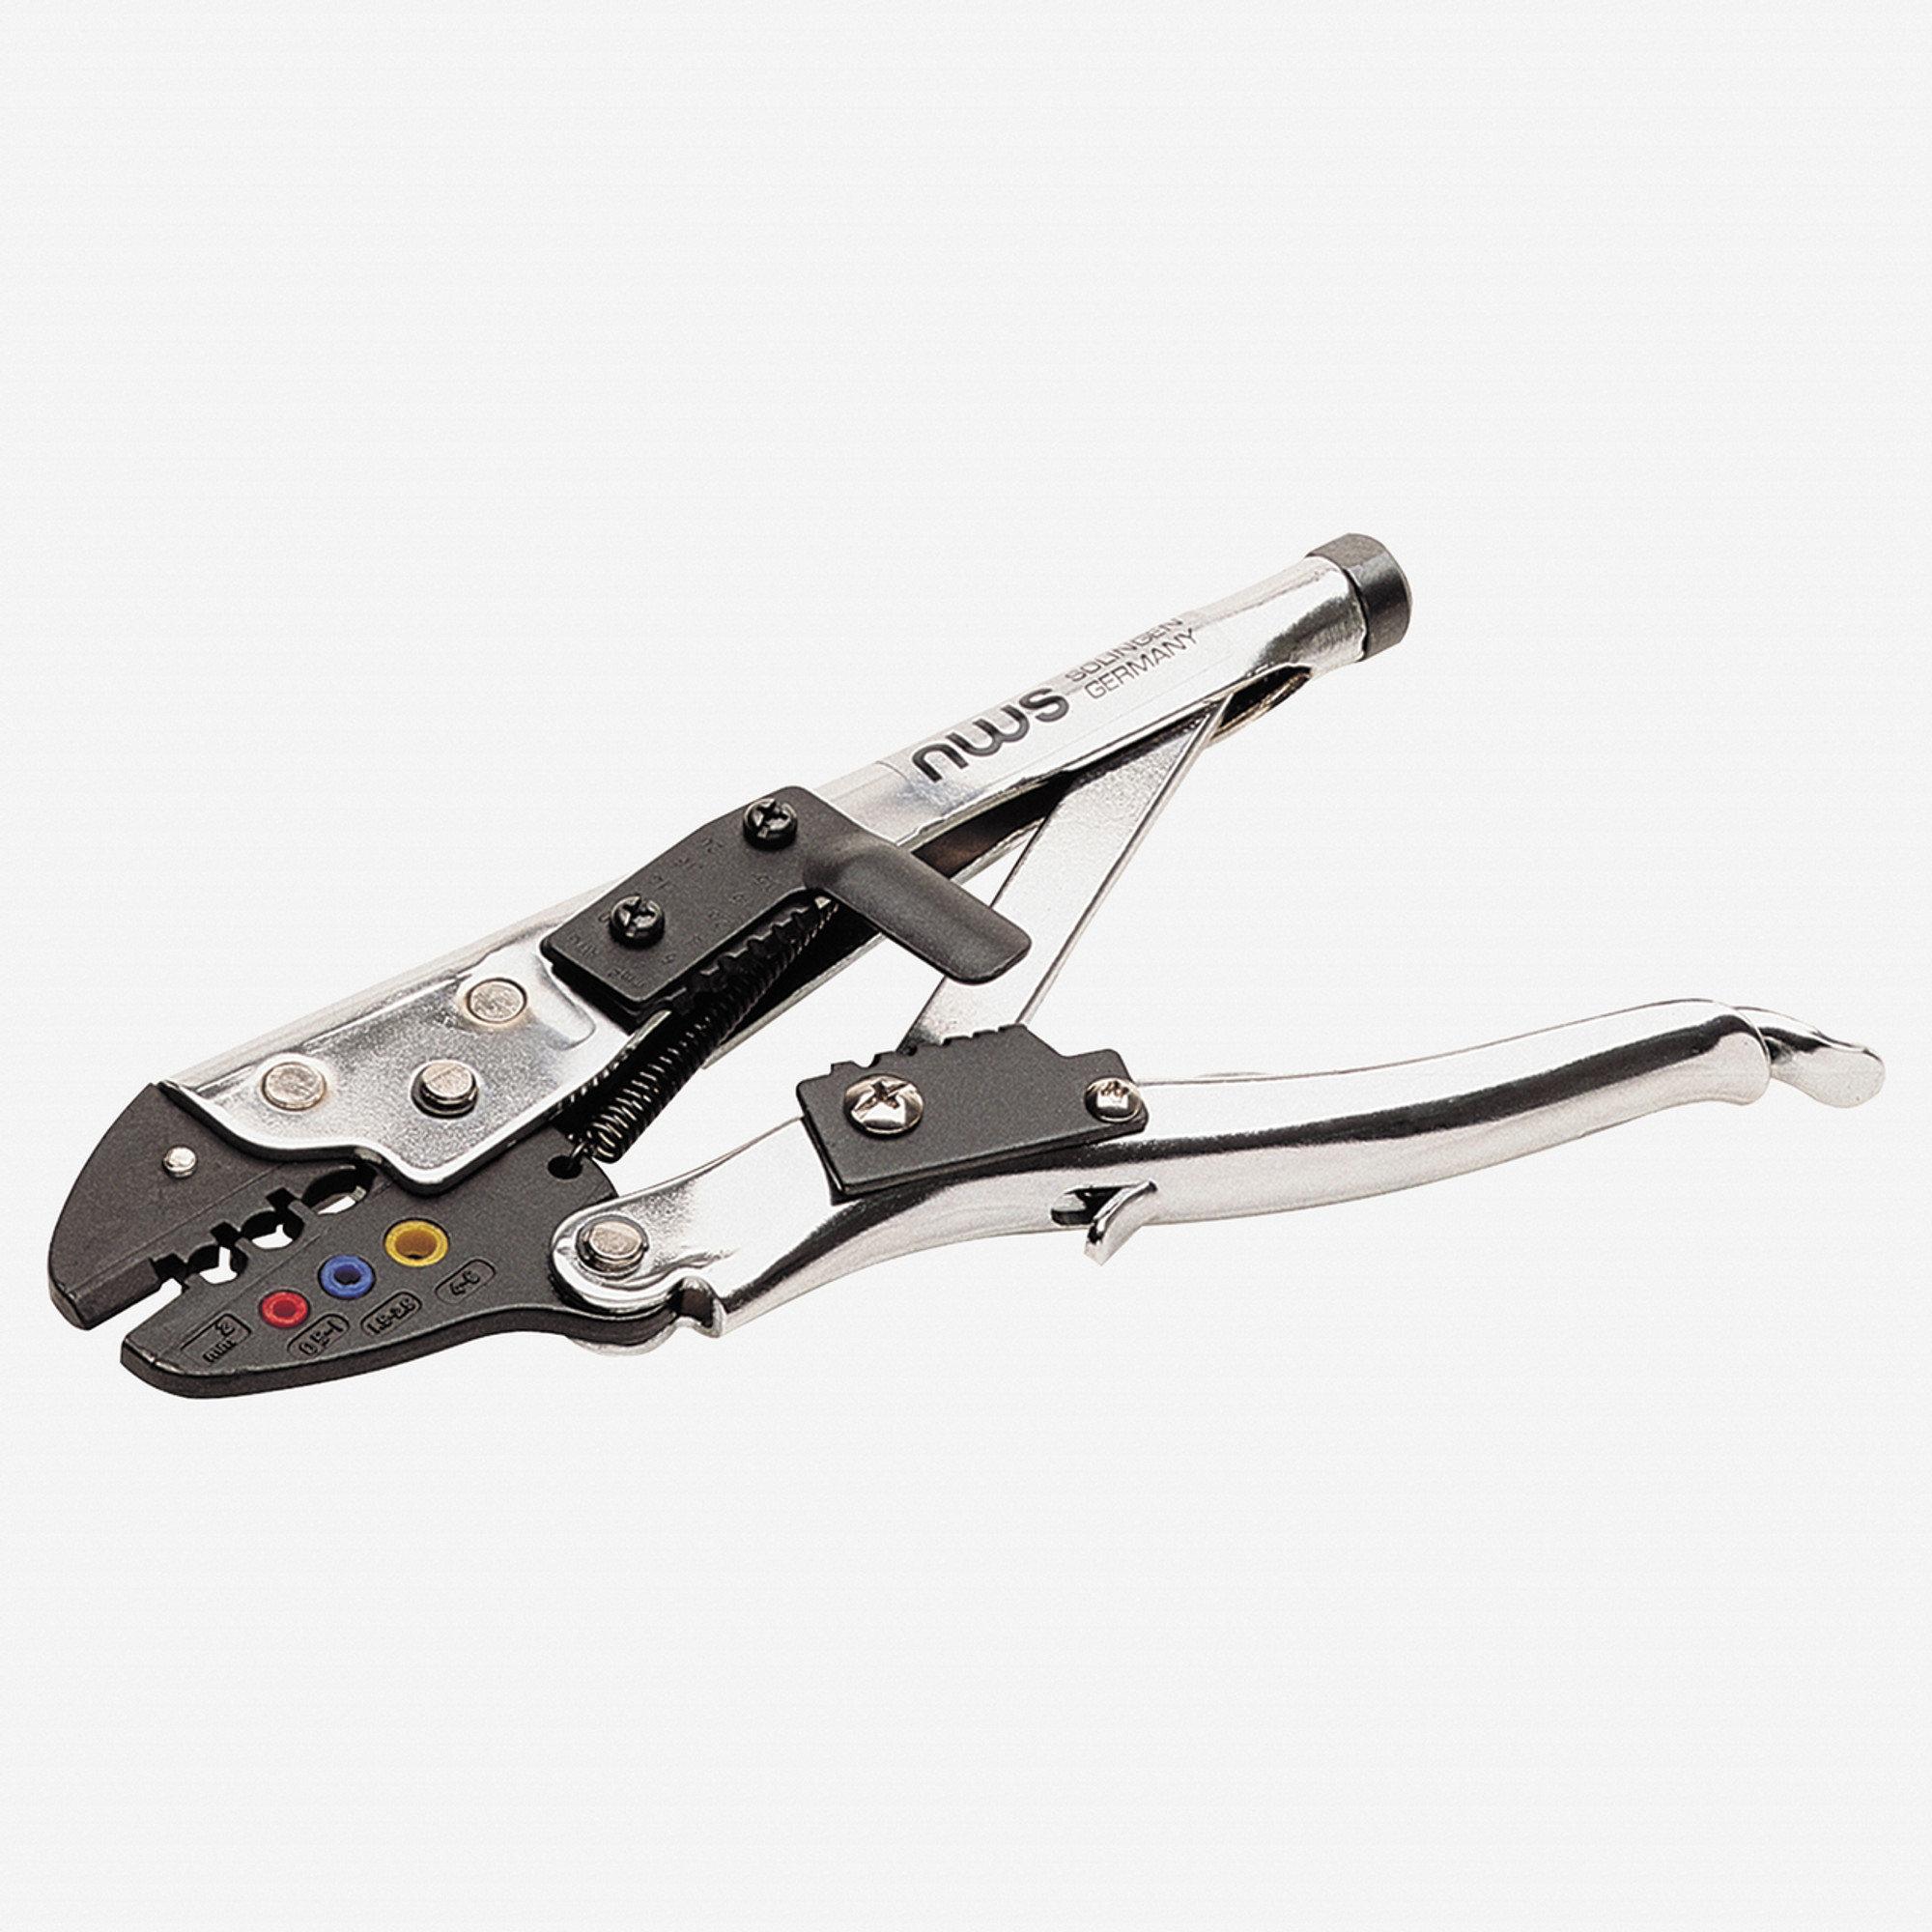 NWS 139C-210 8.25" Crimping Lever Pliers for Terminals - KC Tool